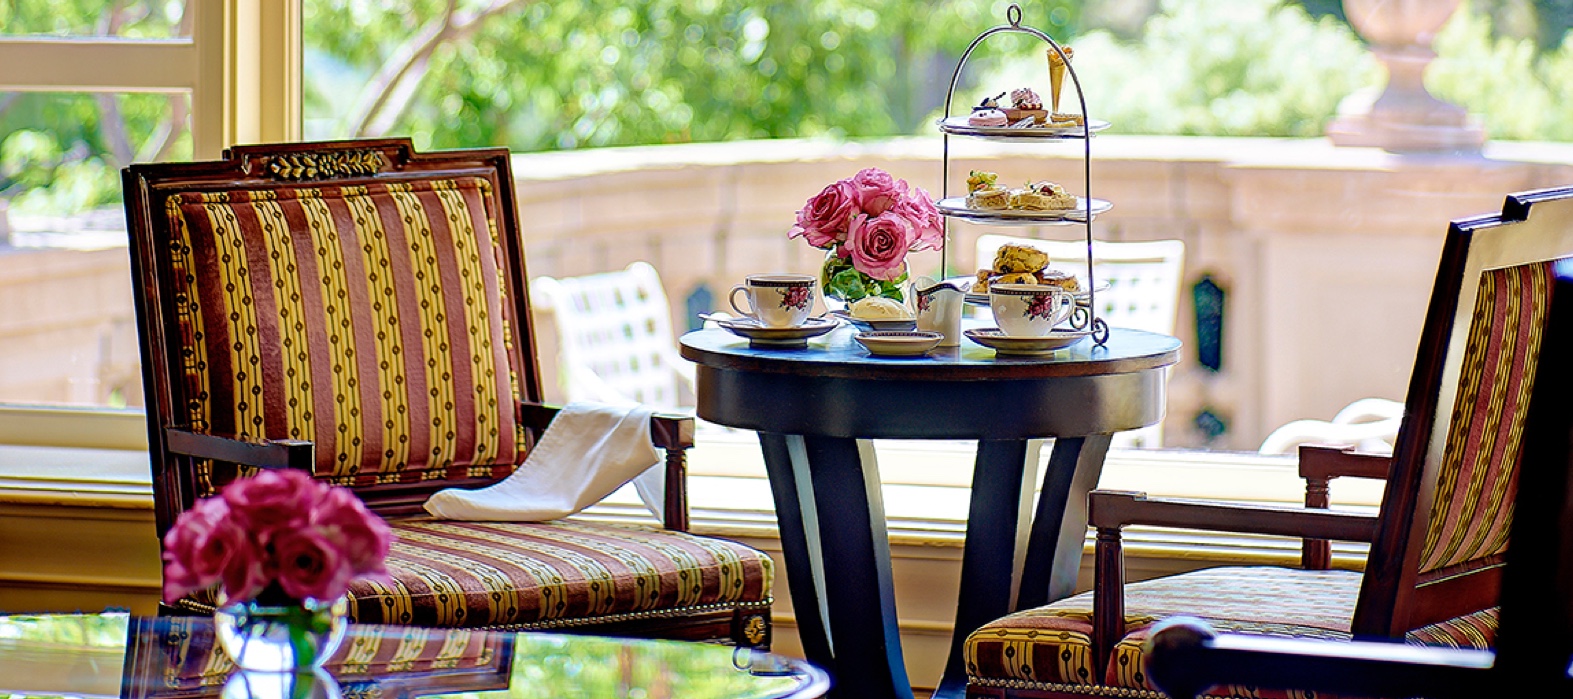 A signature of The Langham brand, The Langham Afternoon Tea offers fluffy scones, tea sandwiches and fine pastries.